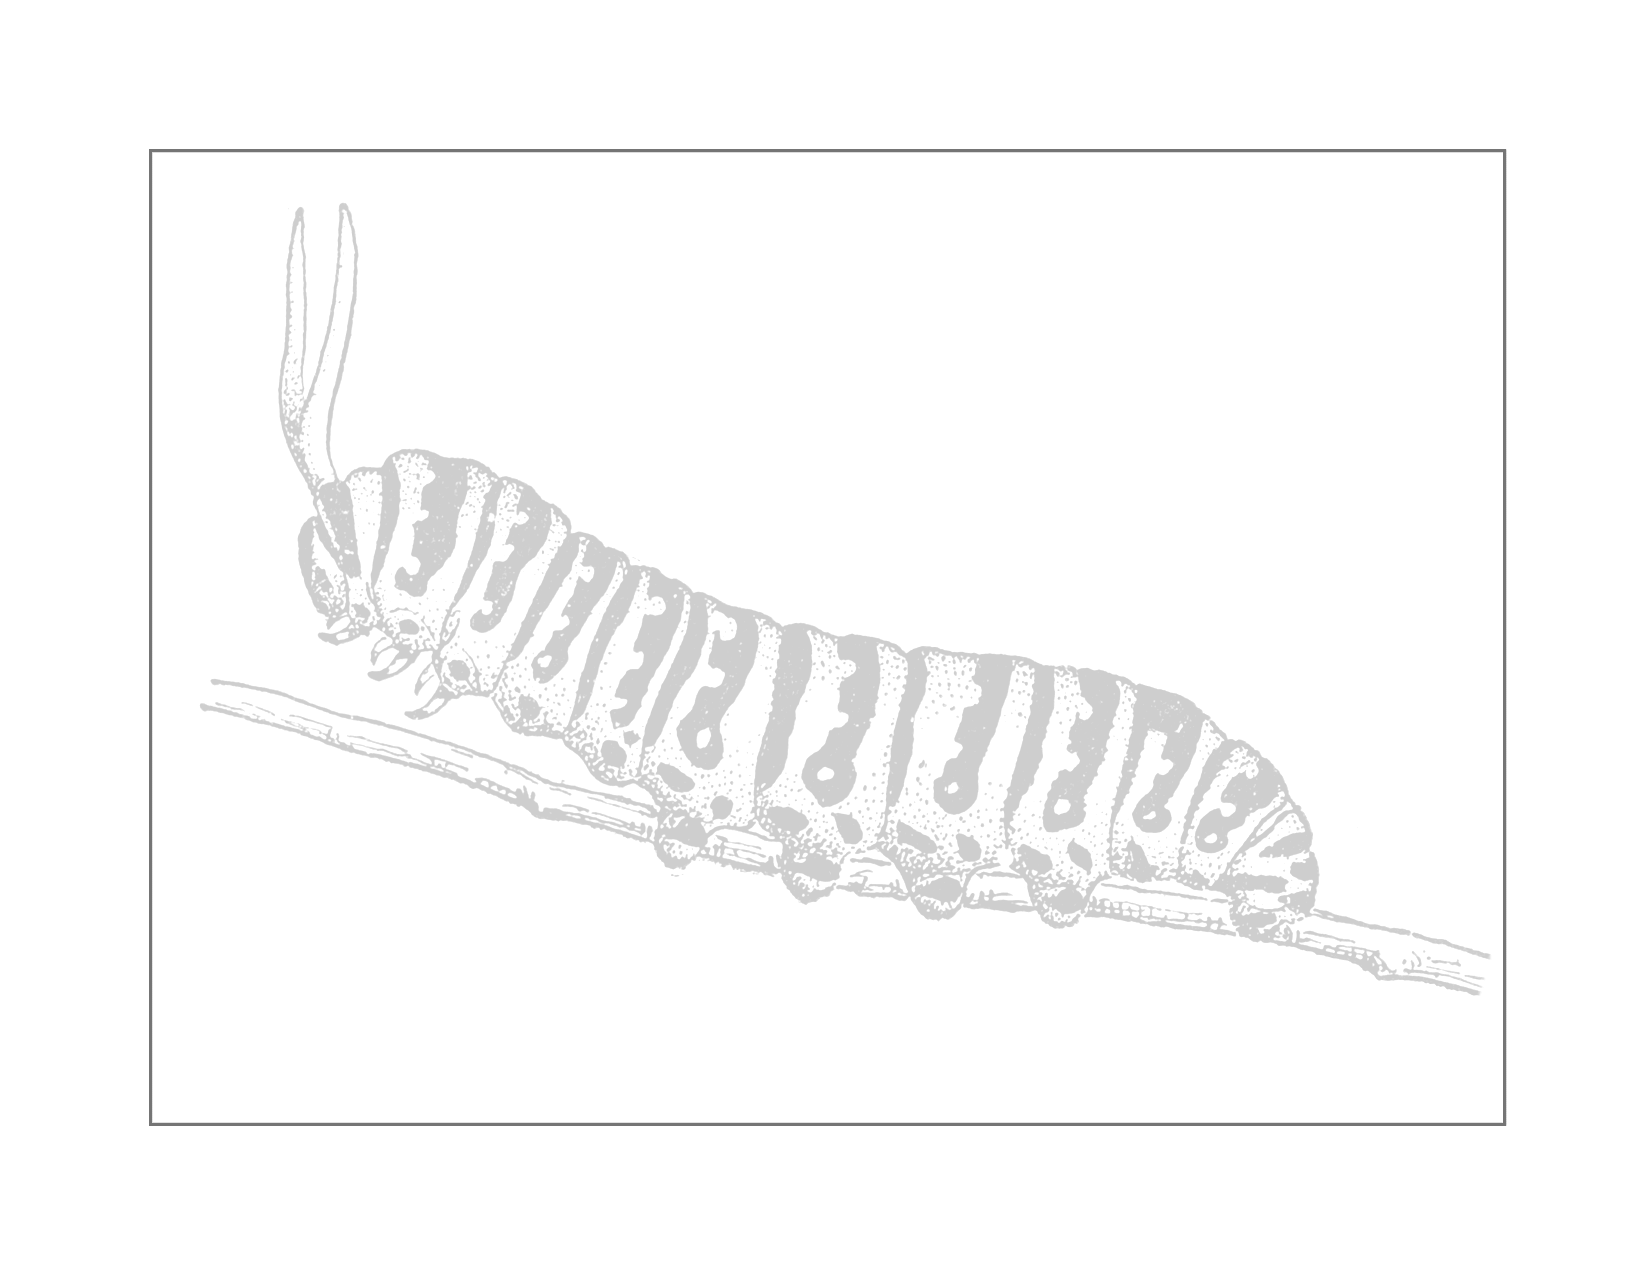 Caterpillar Traceable Coloring Page